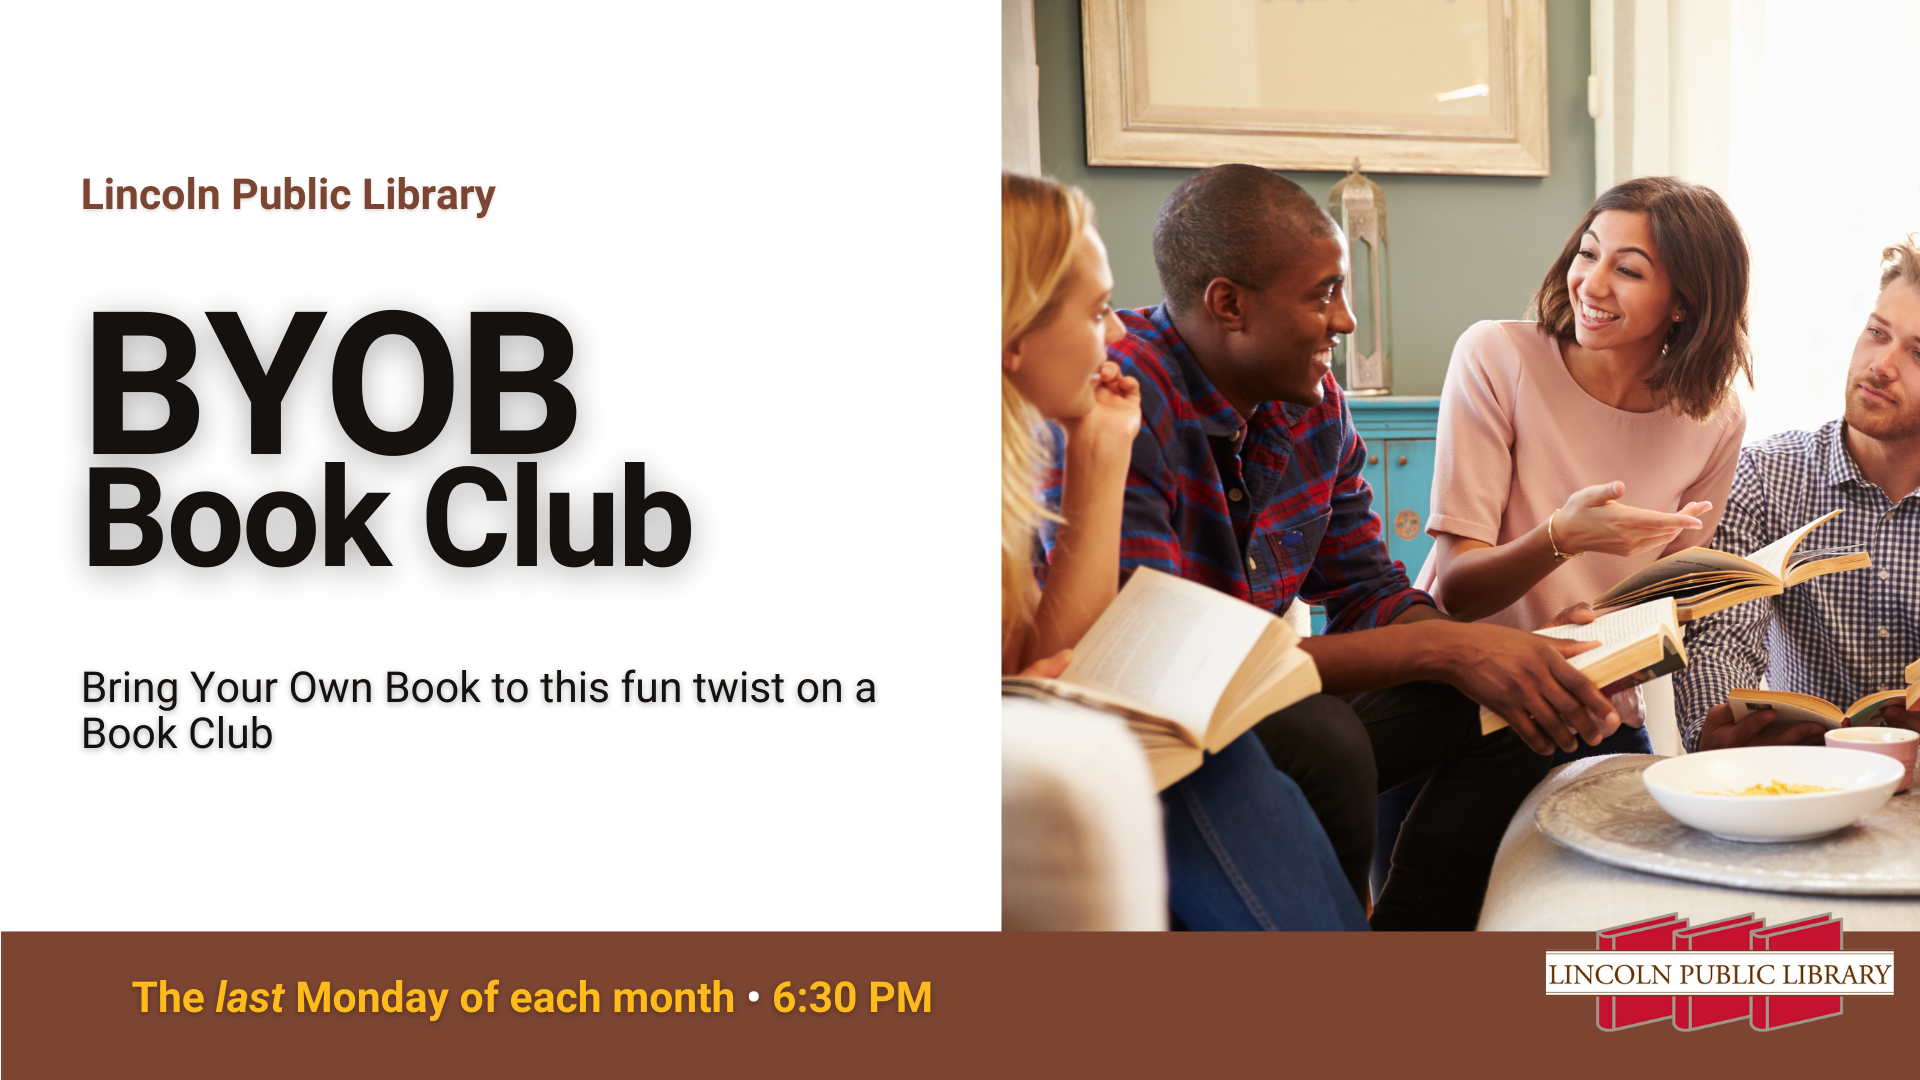 Lincoln Public Library BYOB Book Club: Bring Your Own Book to this fun twist on a Book Club